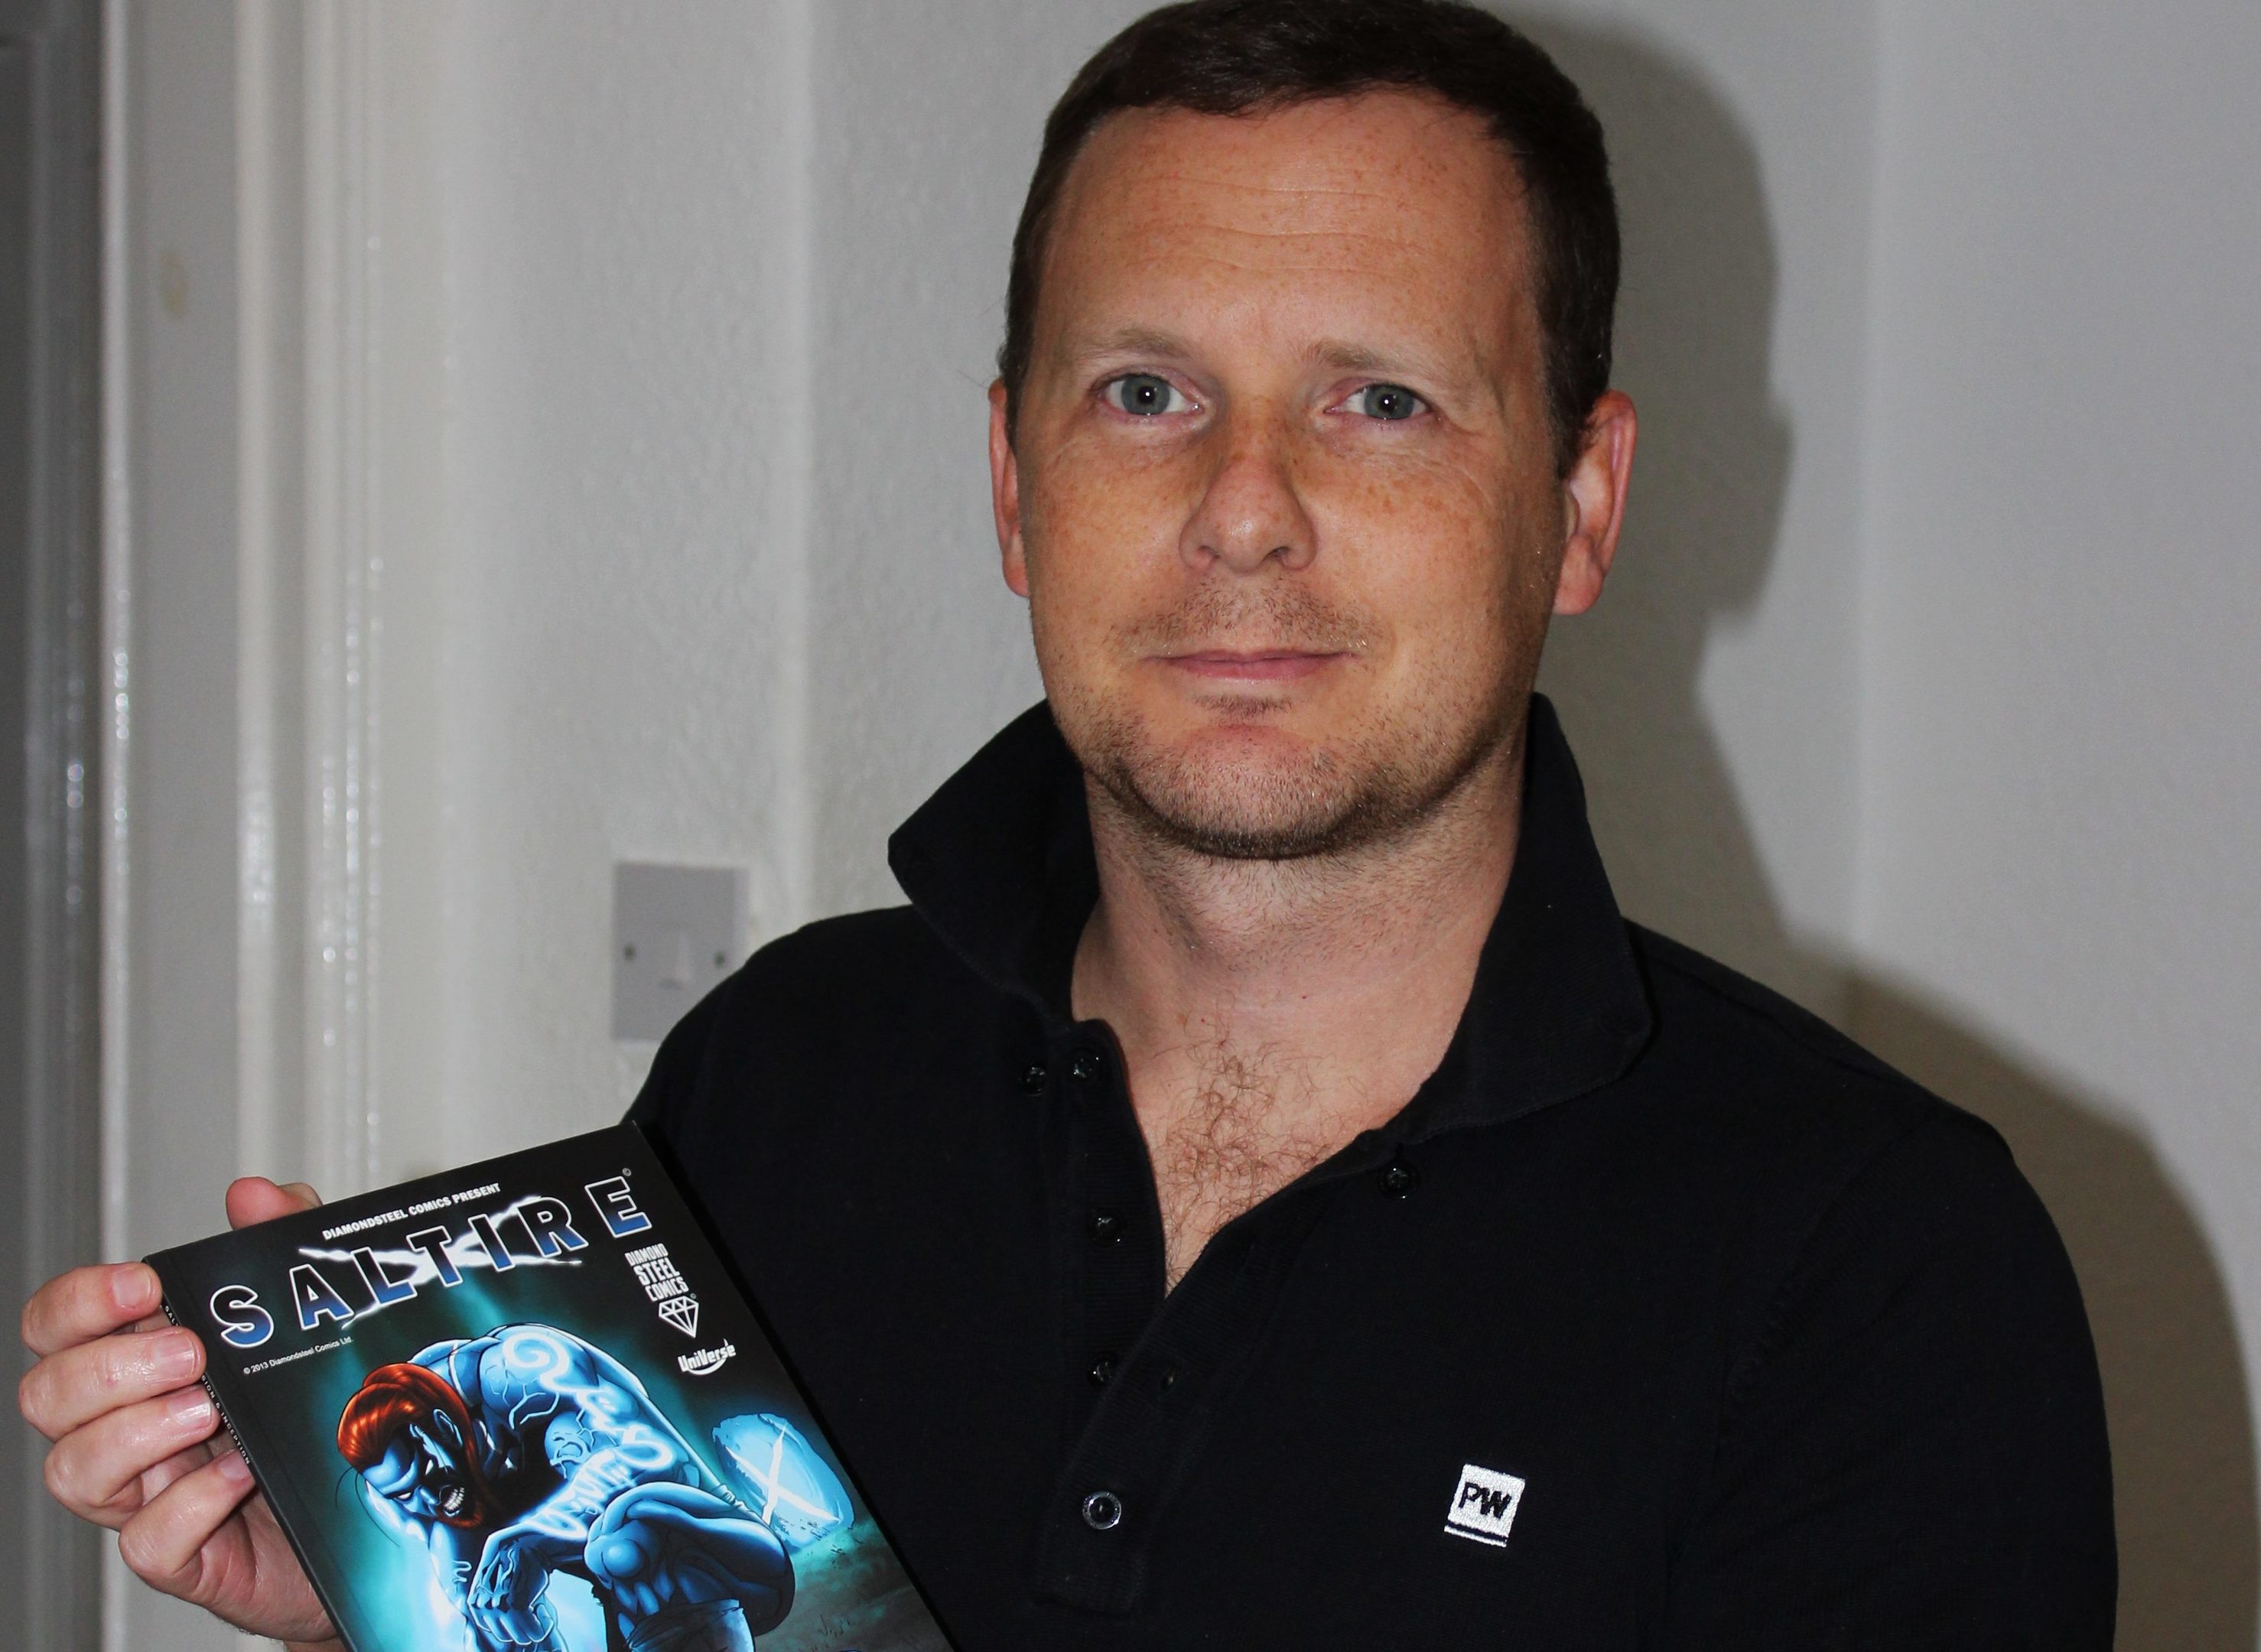 Saltire creator John Ferguson will guest at the first Glenrothes Comic Con